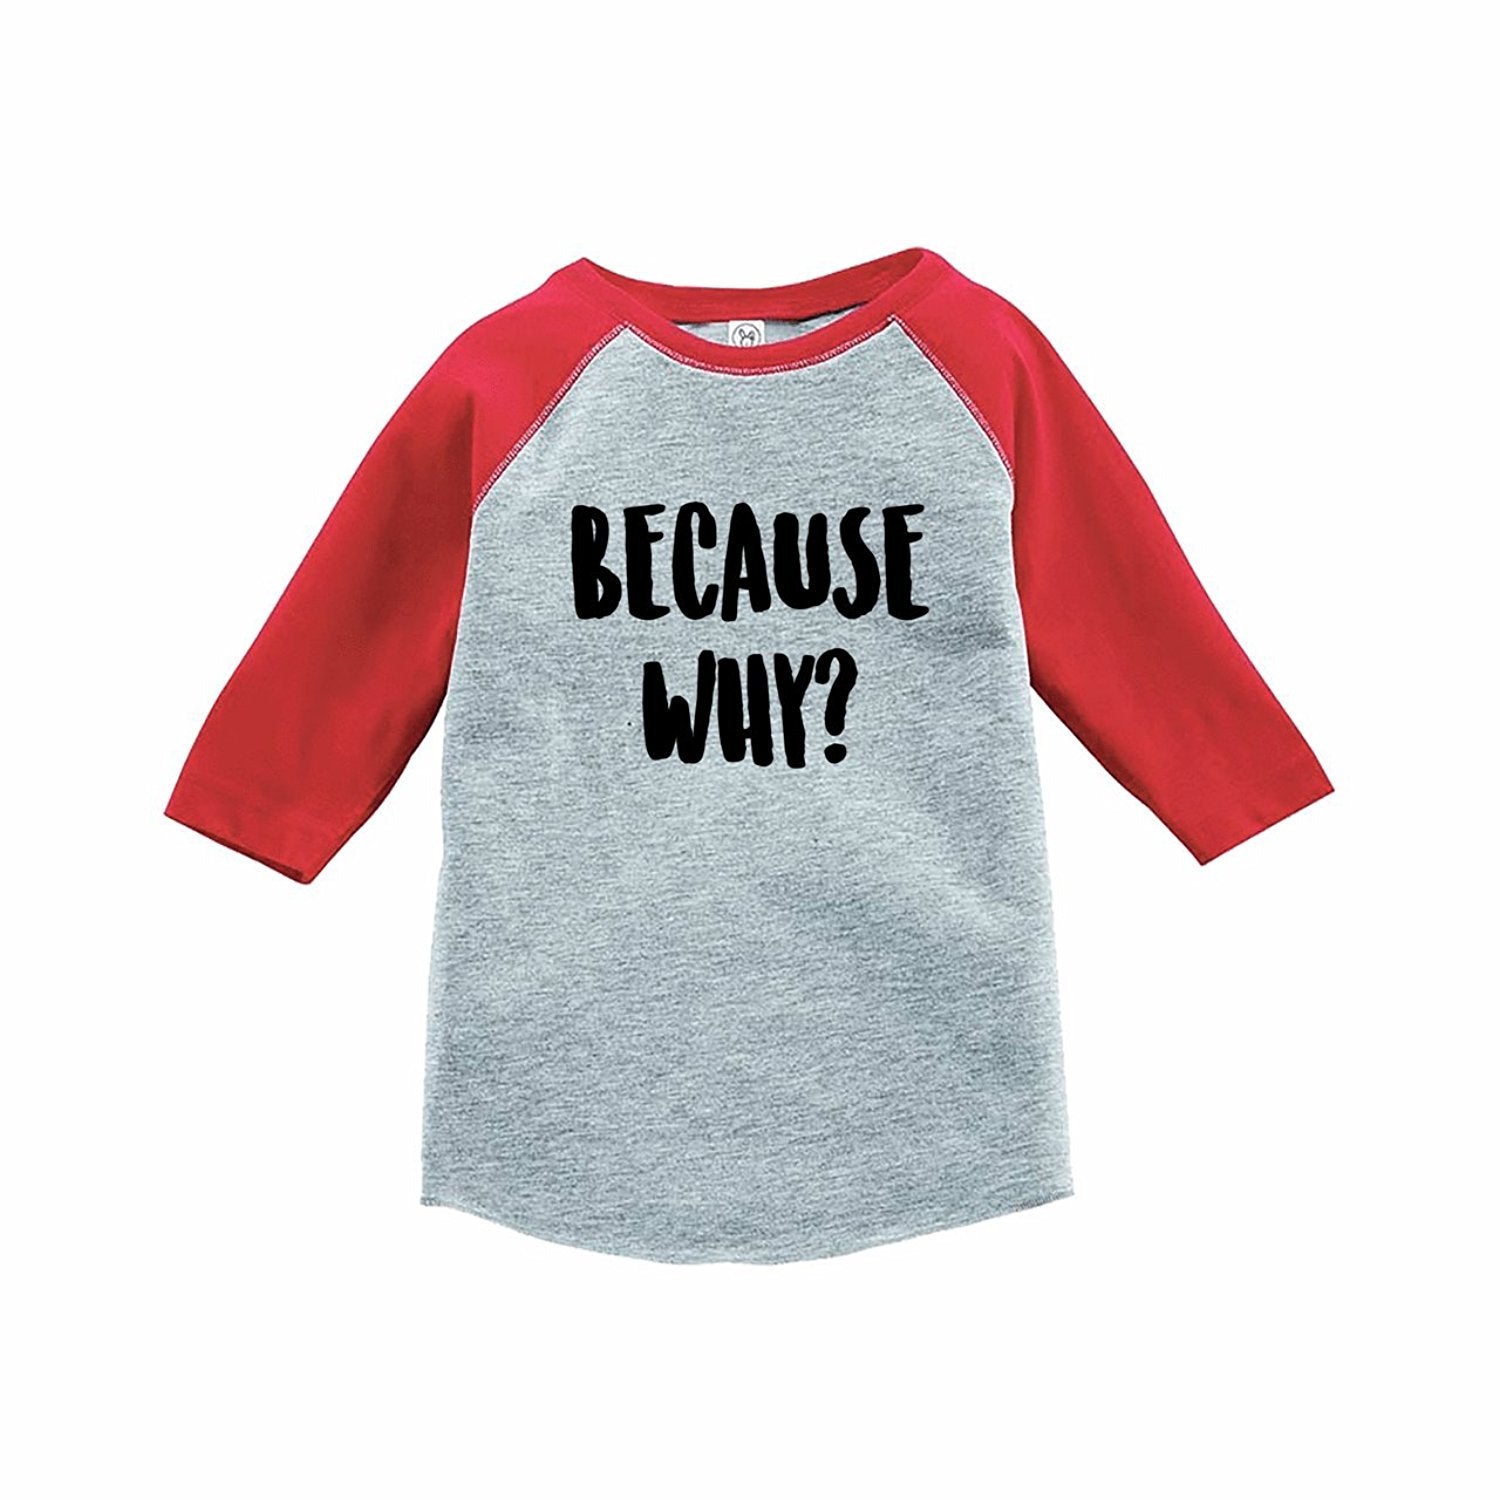 7 ate 9 Apparel Funny Kids Because Why Baseball Tee Red